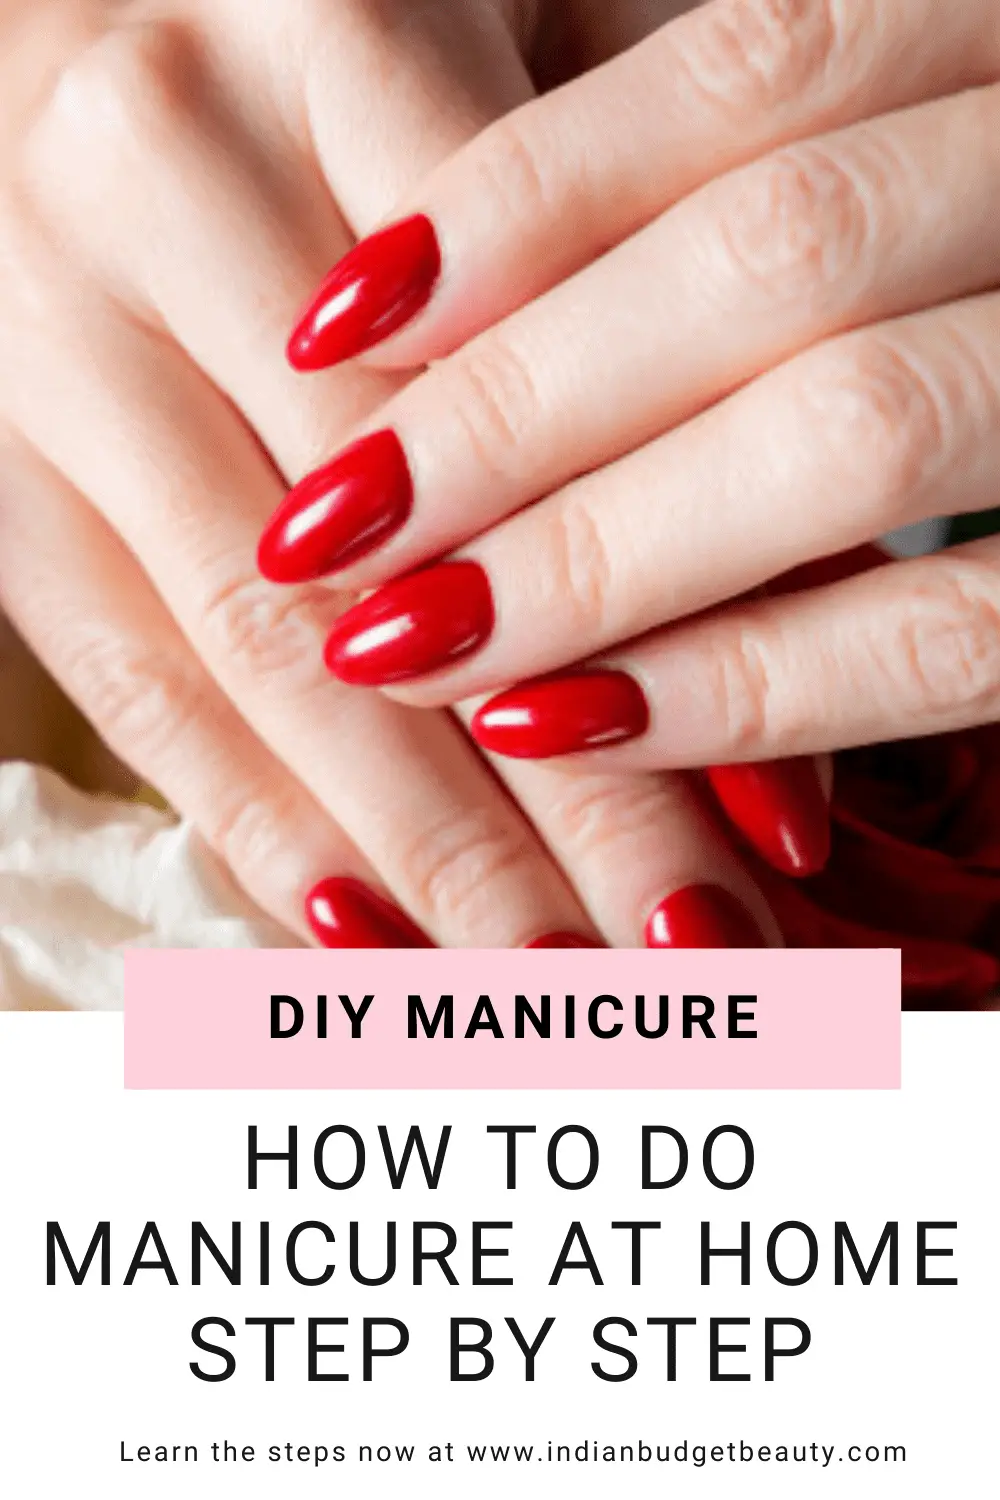 How To Do Manicure At Home | Step by Step Guide